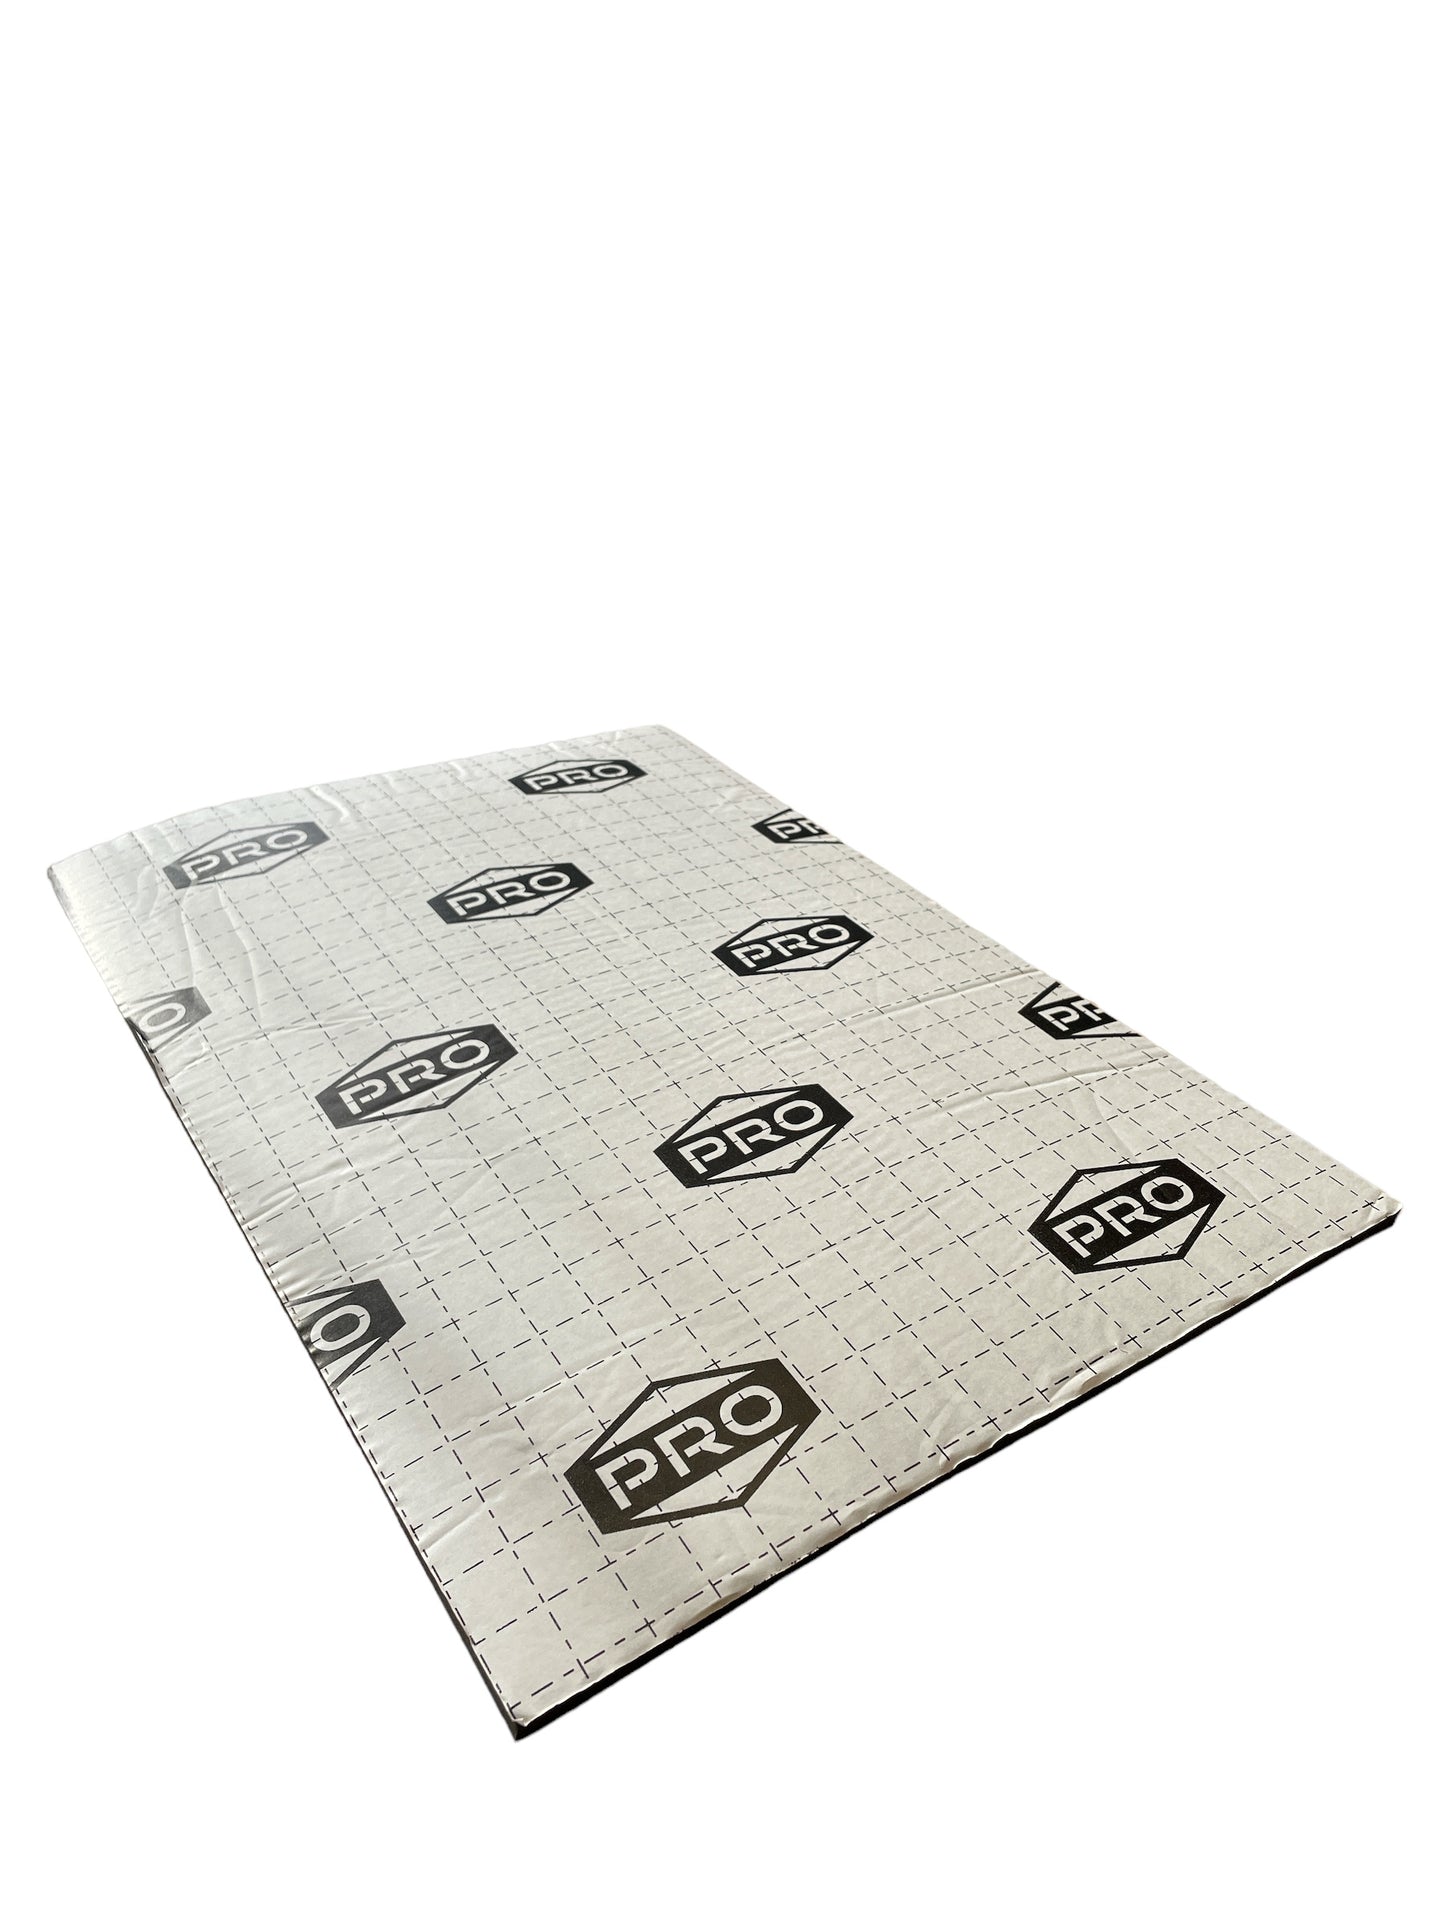 PRO® Thermo Rubber Foam 10mm Sound Absorbing Thermal Deadn Mat 10 sheets 35cm x 50cm 1.75sqm